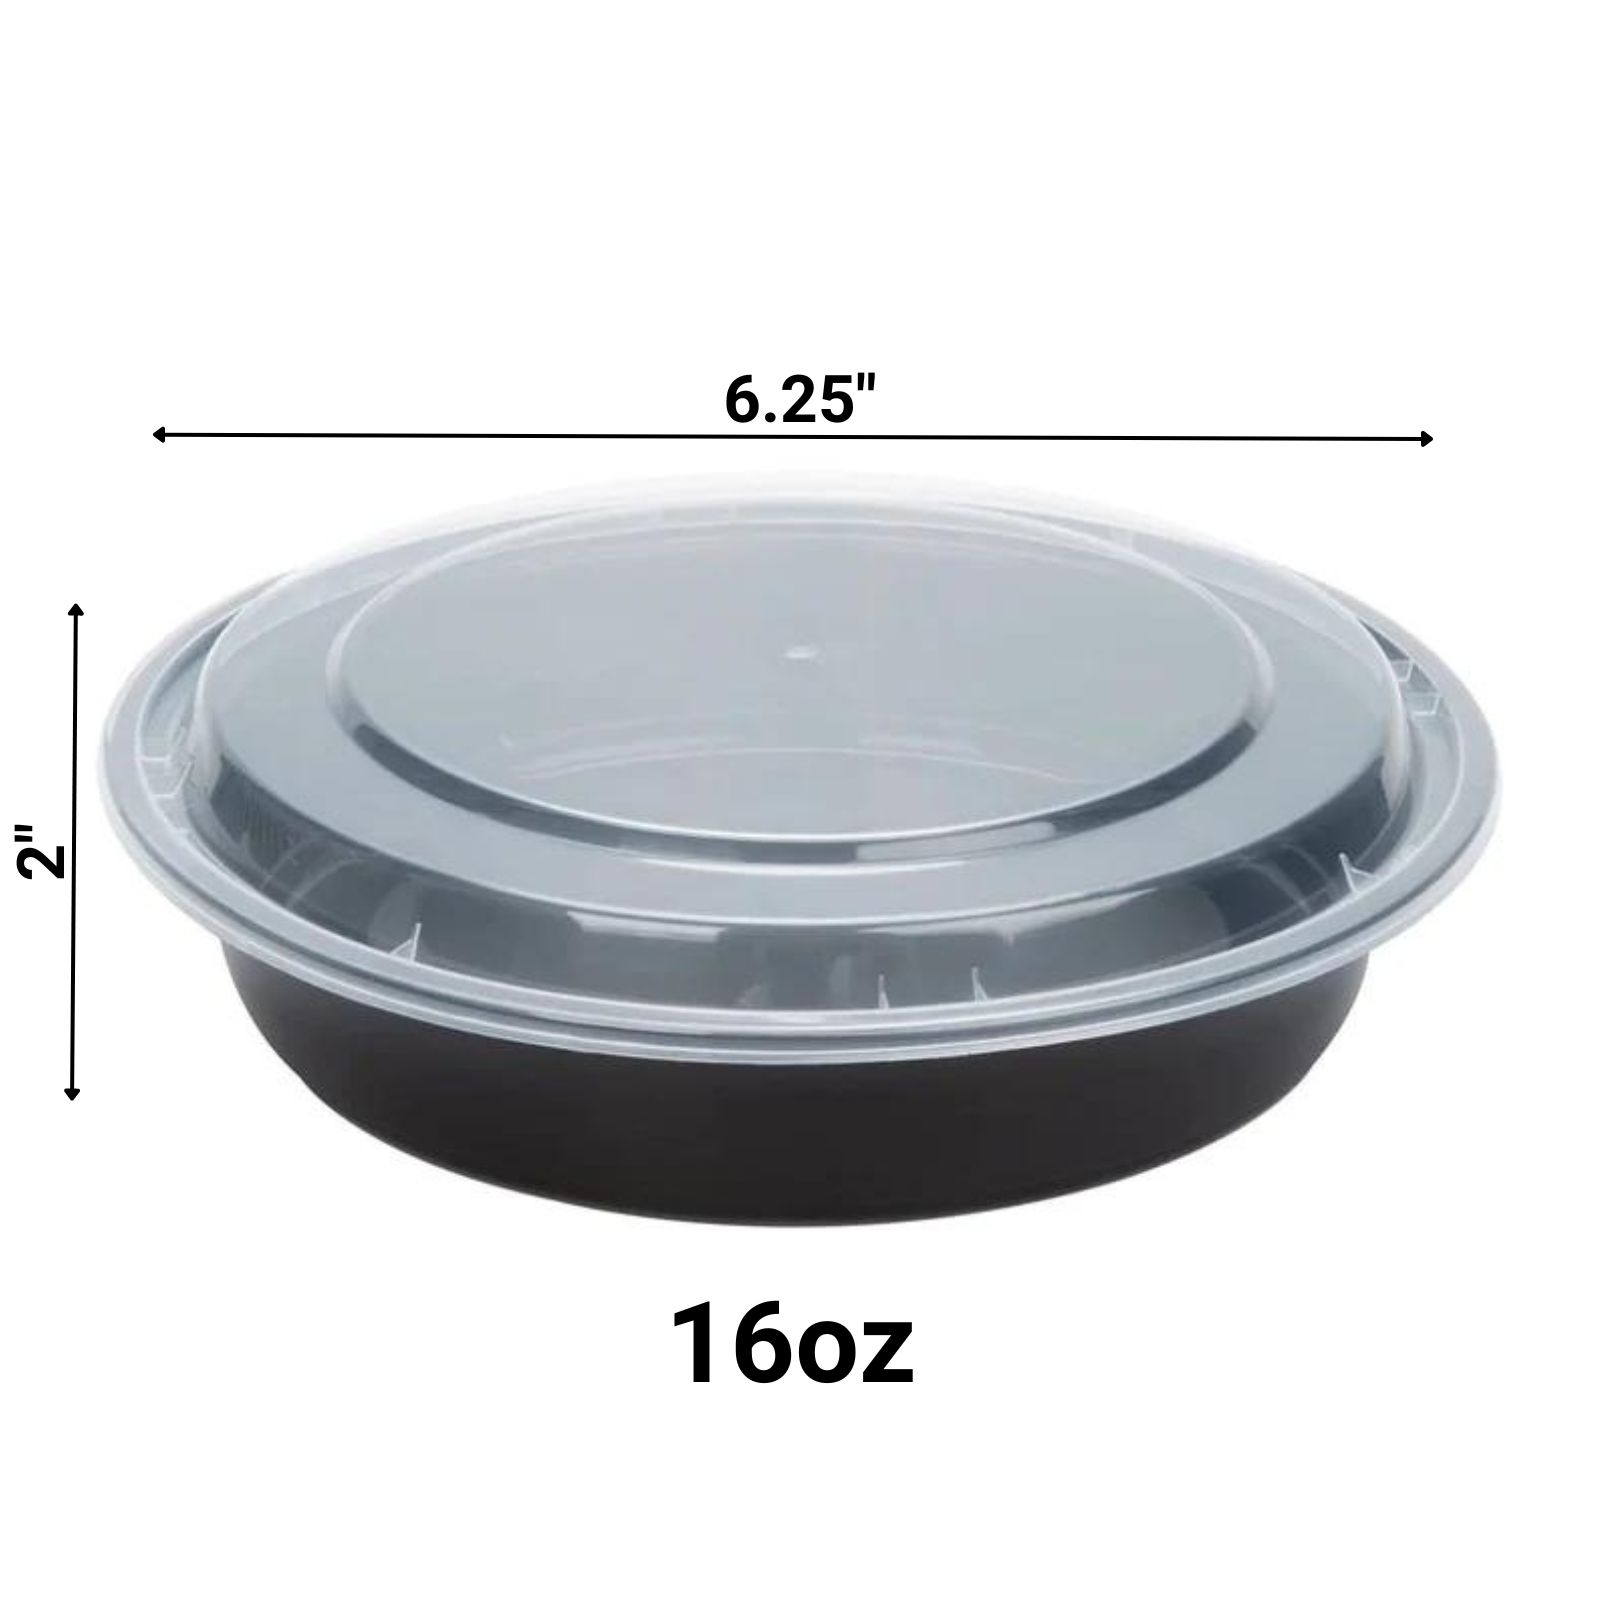 *BULK*  16oz Black Meal Prep/ Bento Box Disposable Container with Clear Lid Food Storage & Serving VeZee   